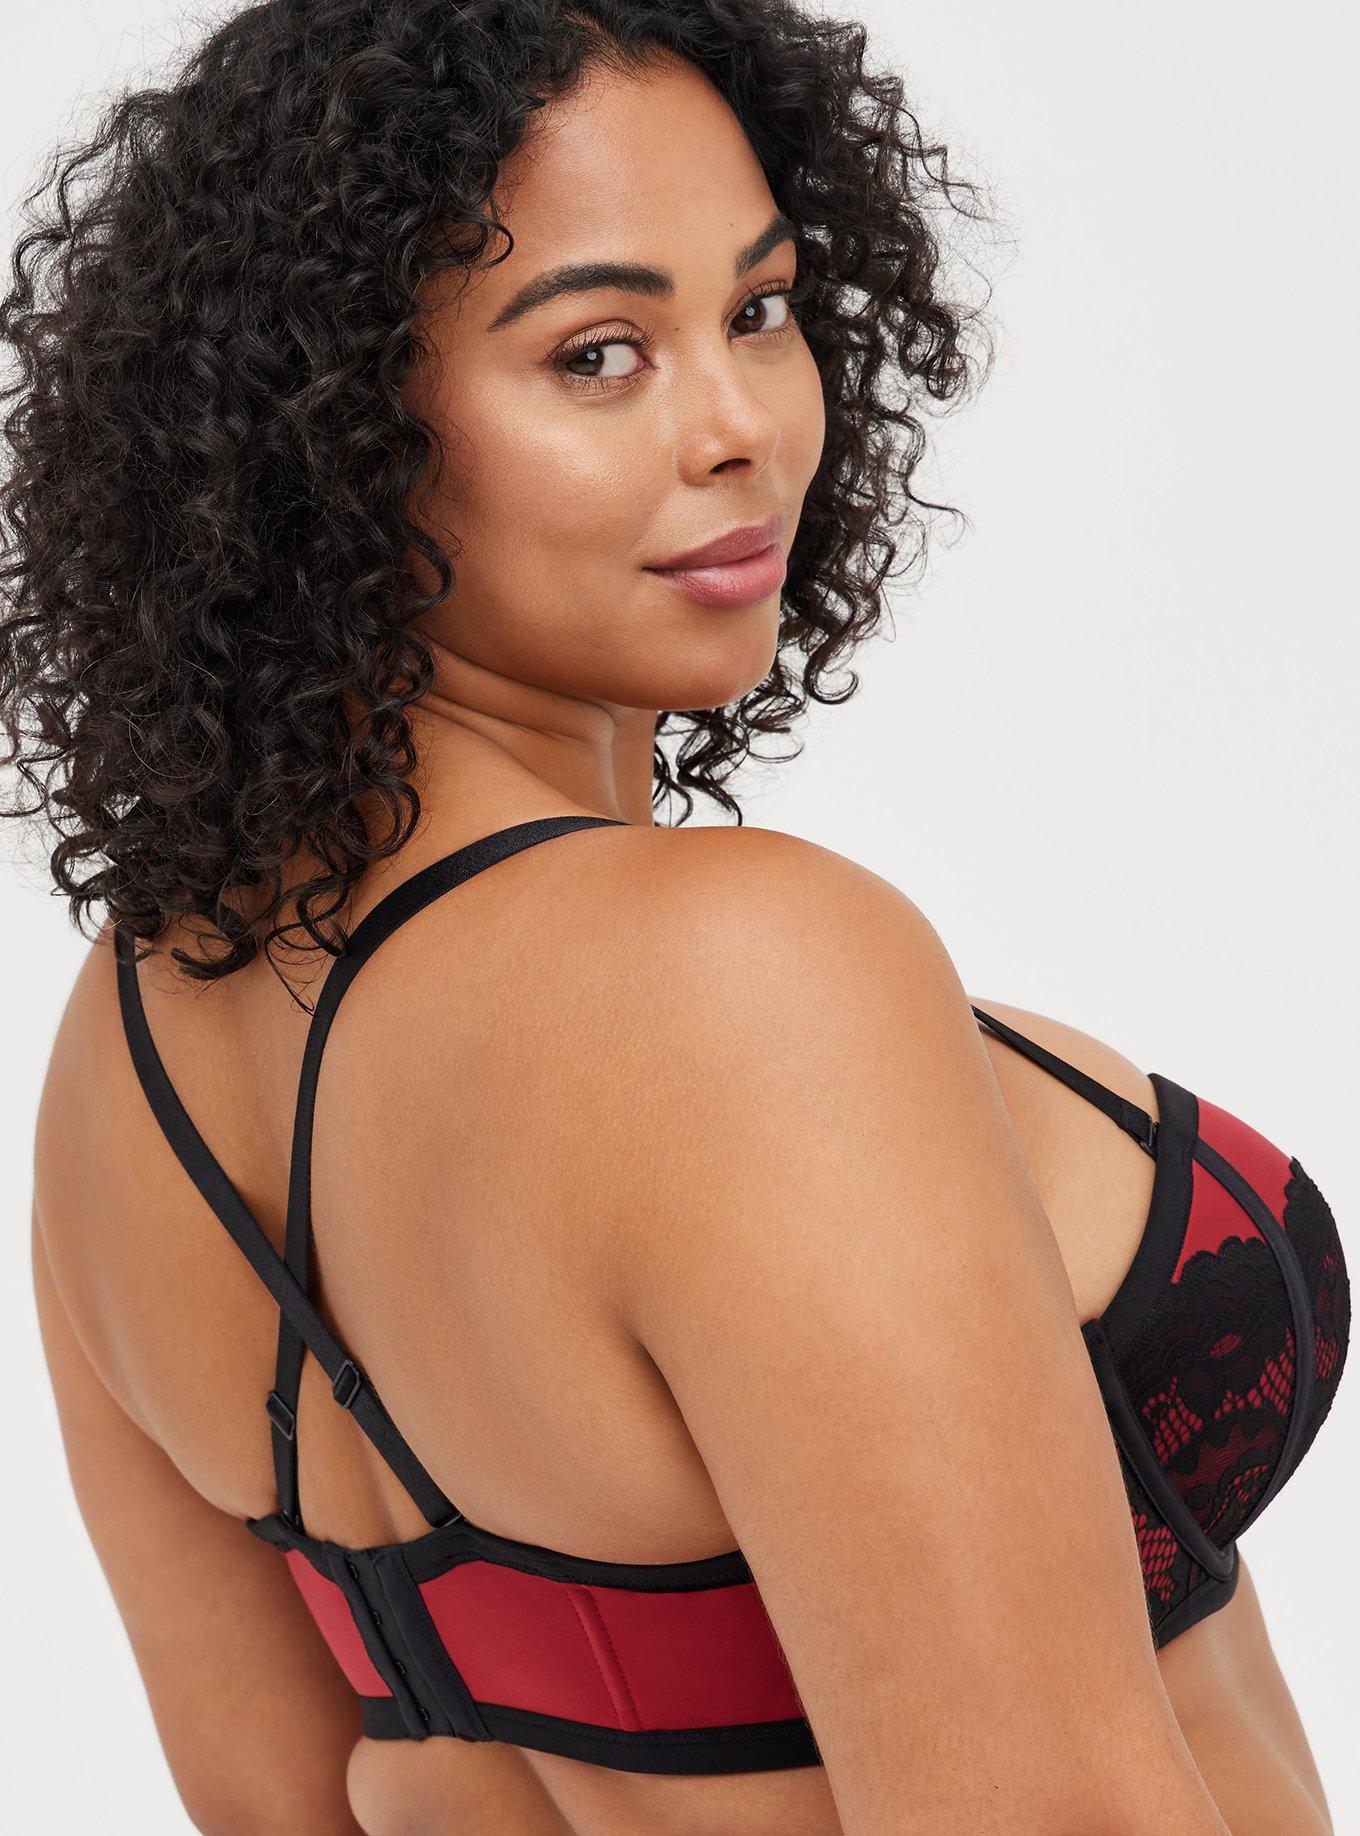 Torrid [] NWT Bombshell Everyday Strapless Push-Up Bra- 50D Size undefined  - $32 New With Tags - From Melissa